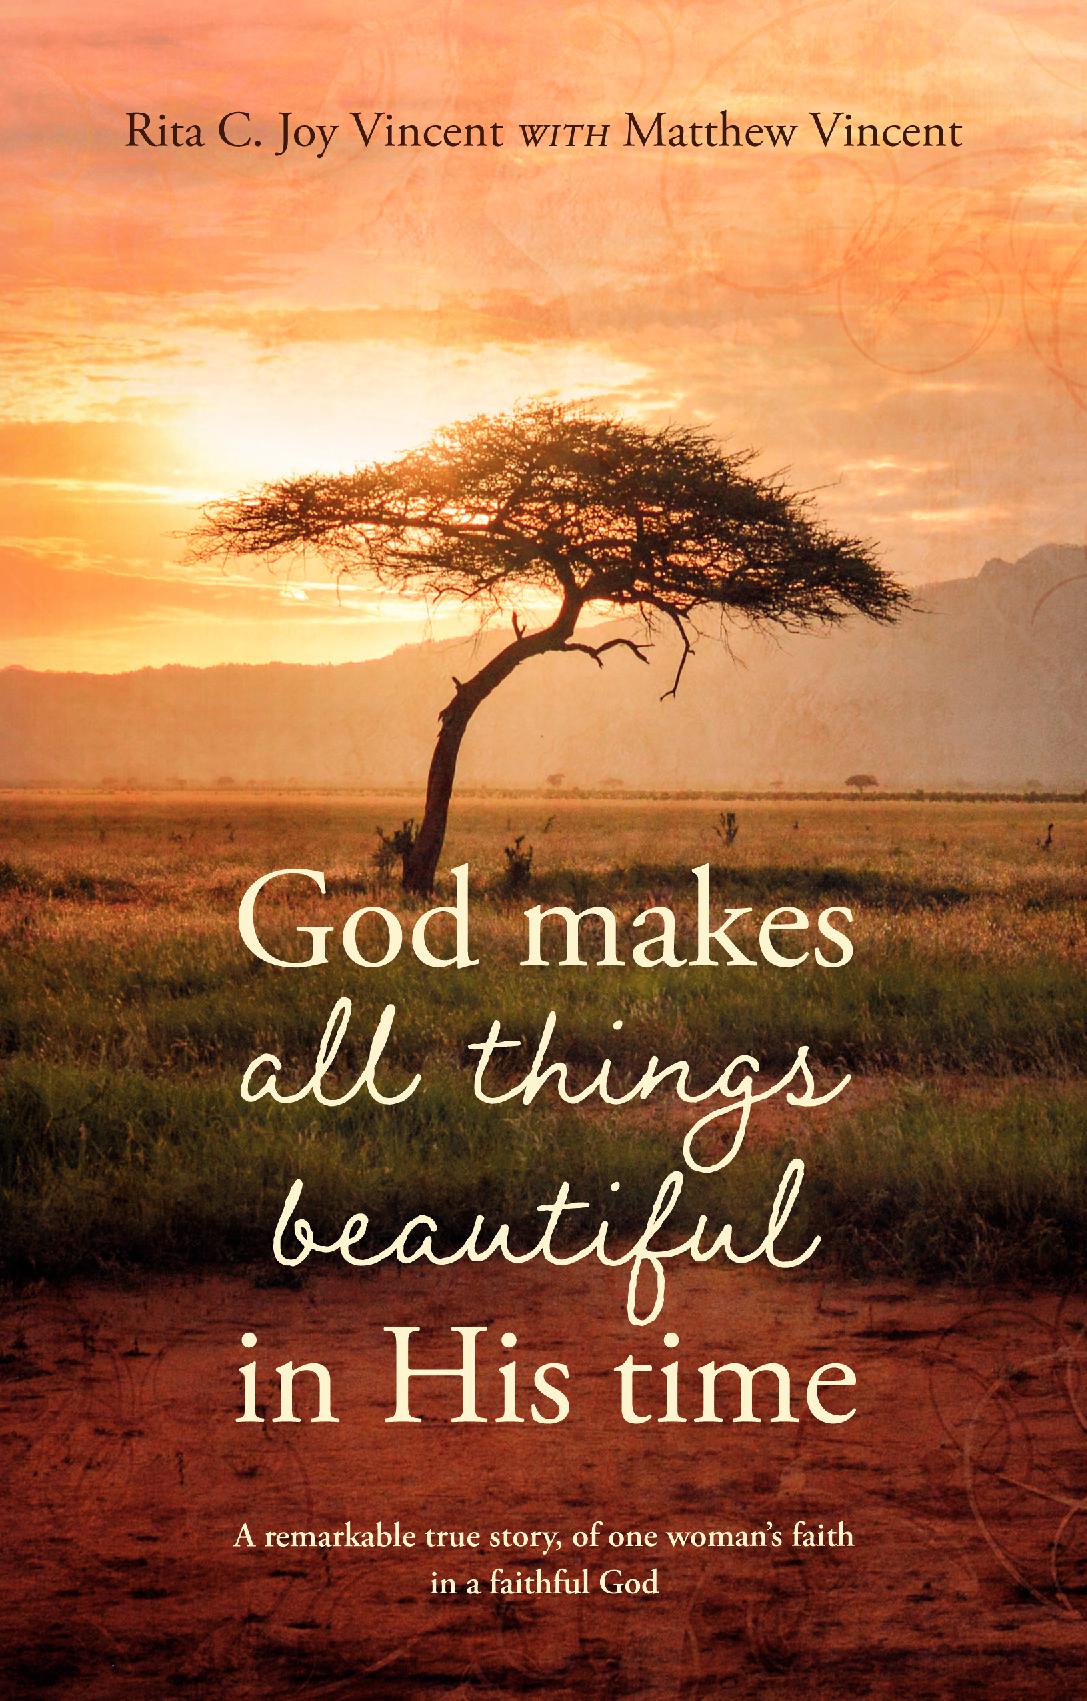 God makes all things in His time